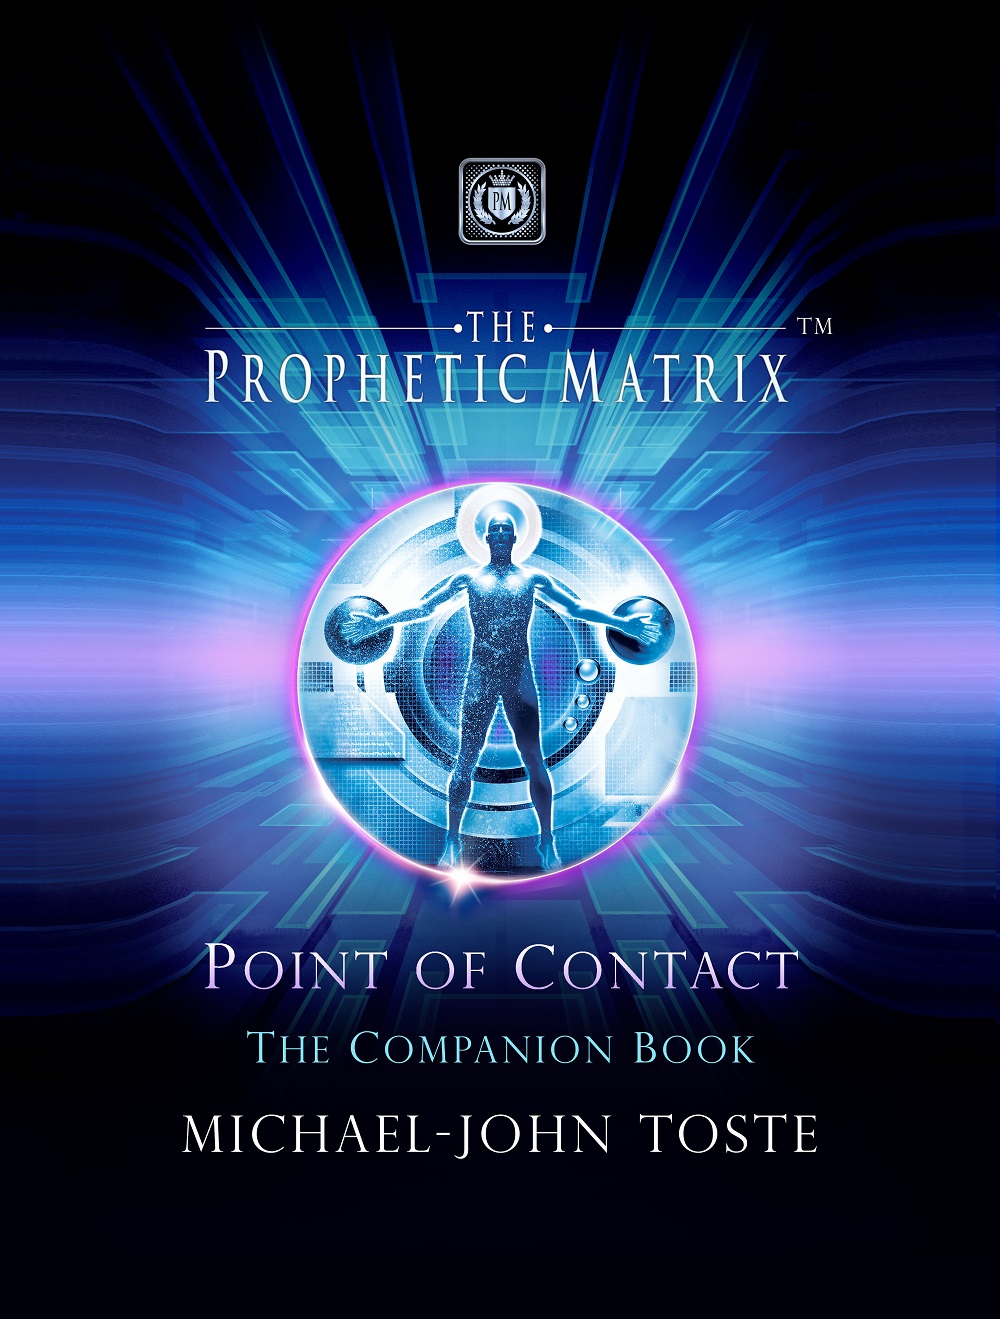 Point of Contact, Michael-John Toste’s eBook Travels One Trillion Miles Into Space In Remembrance of 911 Tribute